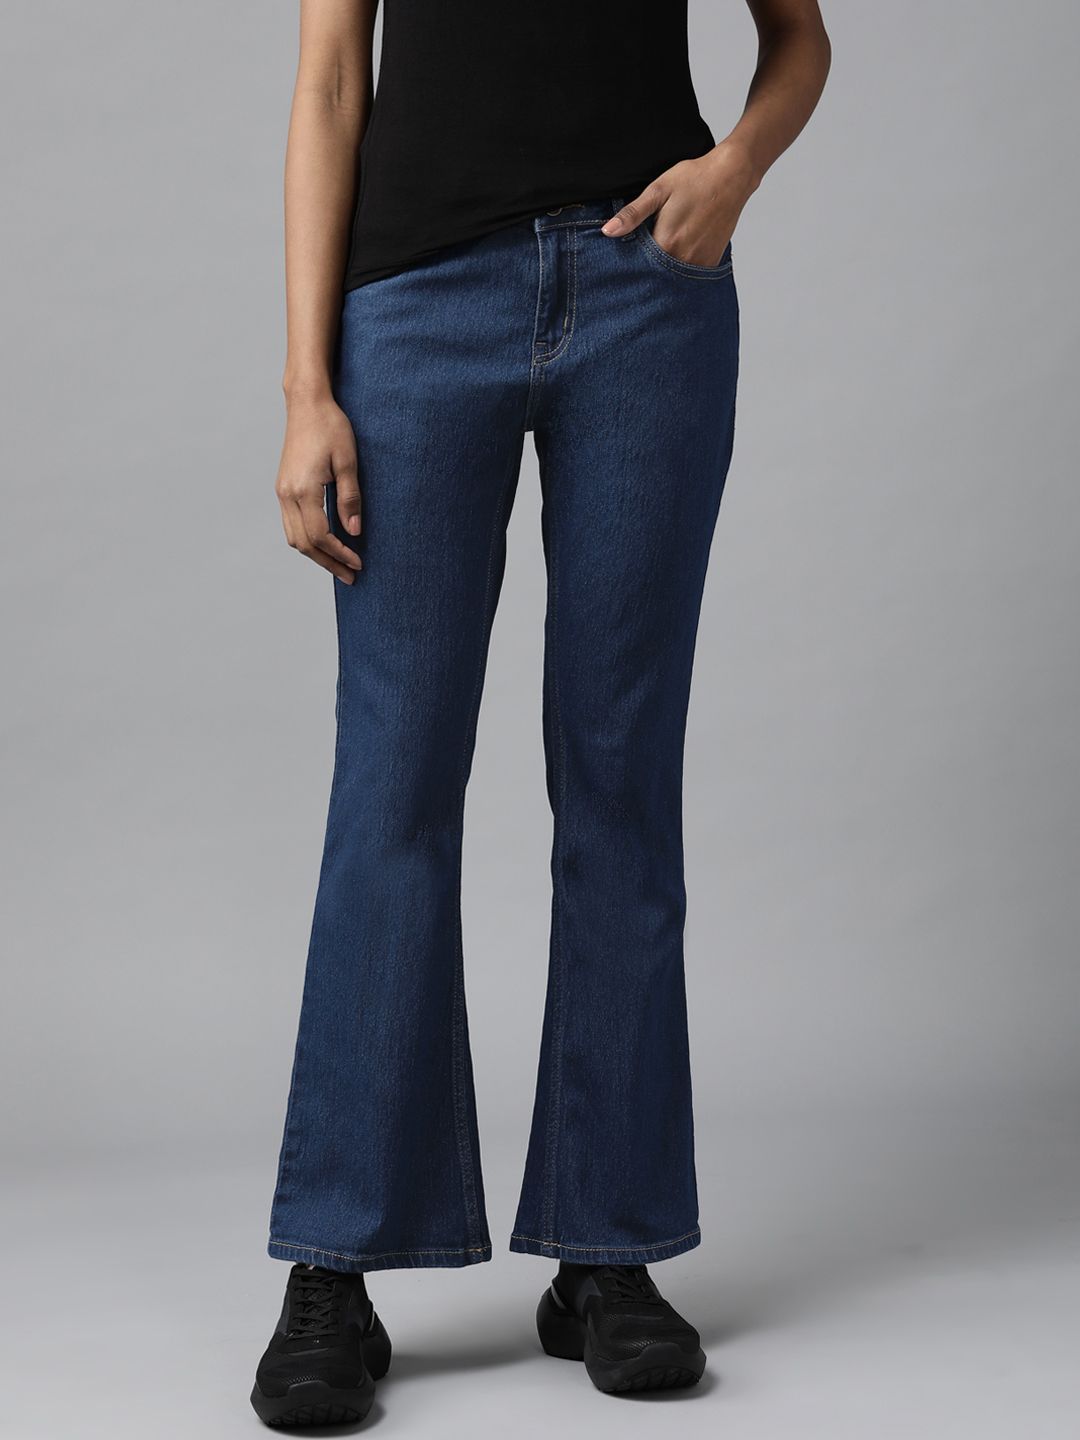 The Roadster Lifestyle Co Women Blue Bootcut Stretchable Jeans Price in India